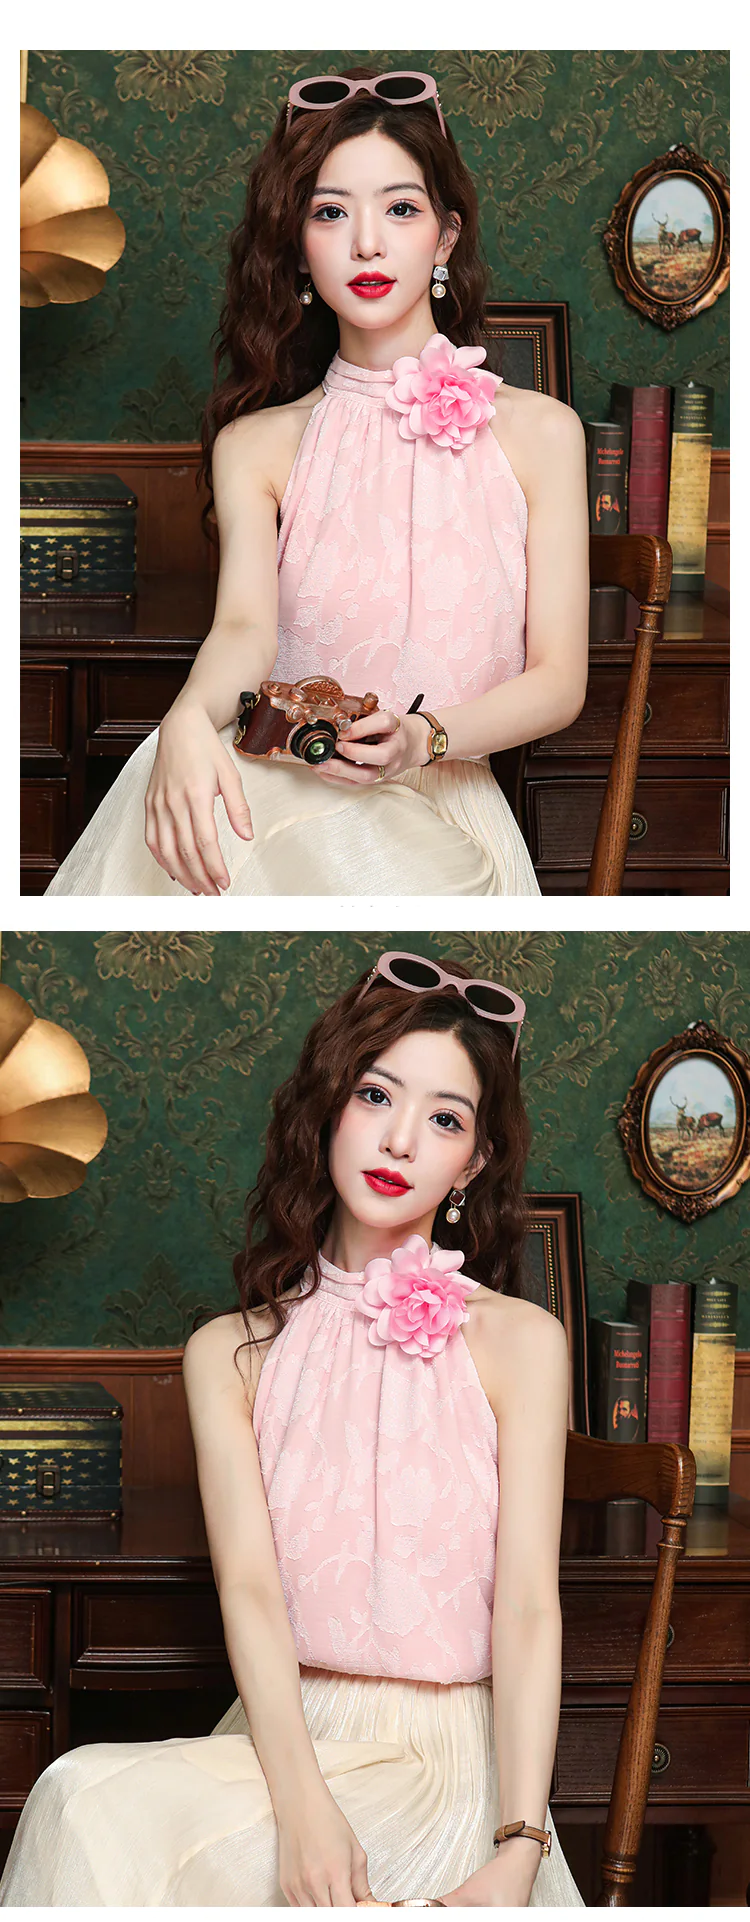 Chic-Chanel-Style-Jacquard-Chiffon-Halter-Casual-Shirt-with-3D-Flower17